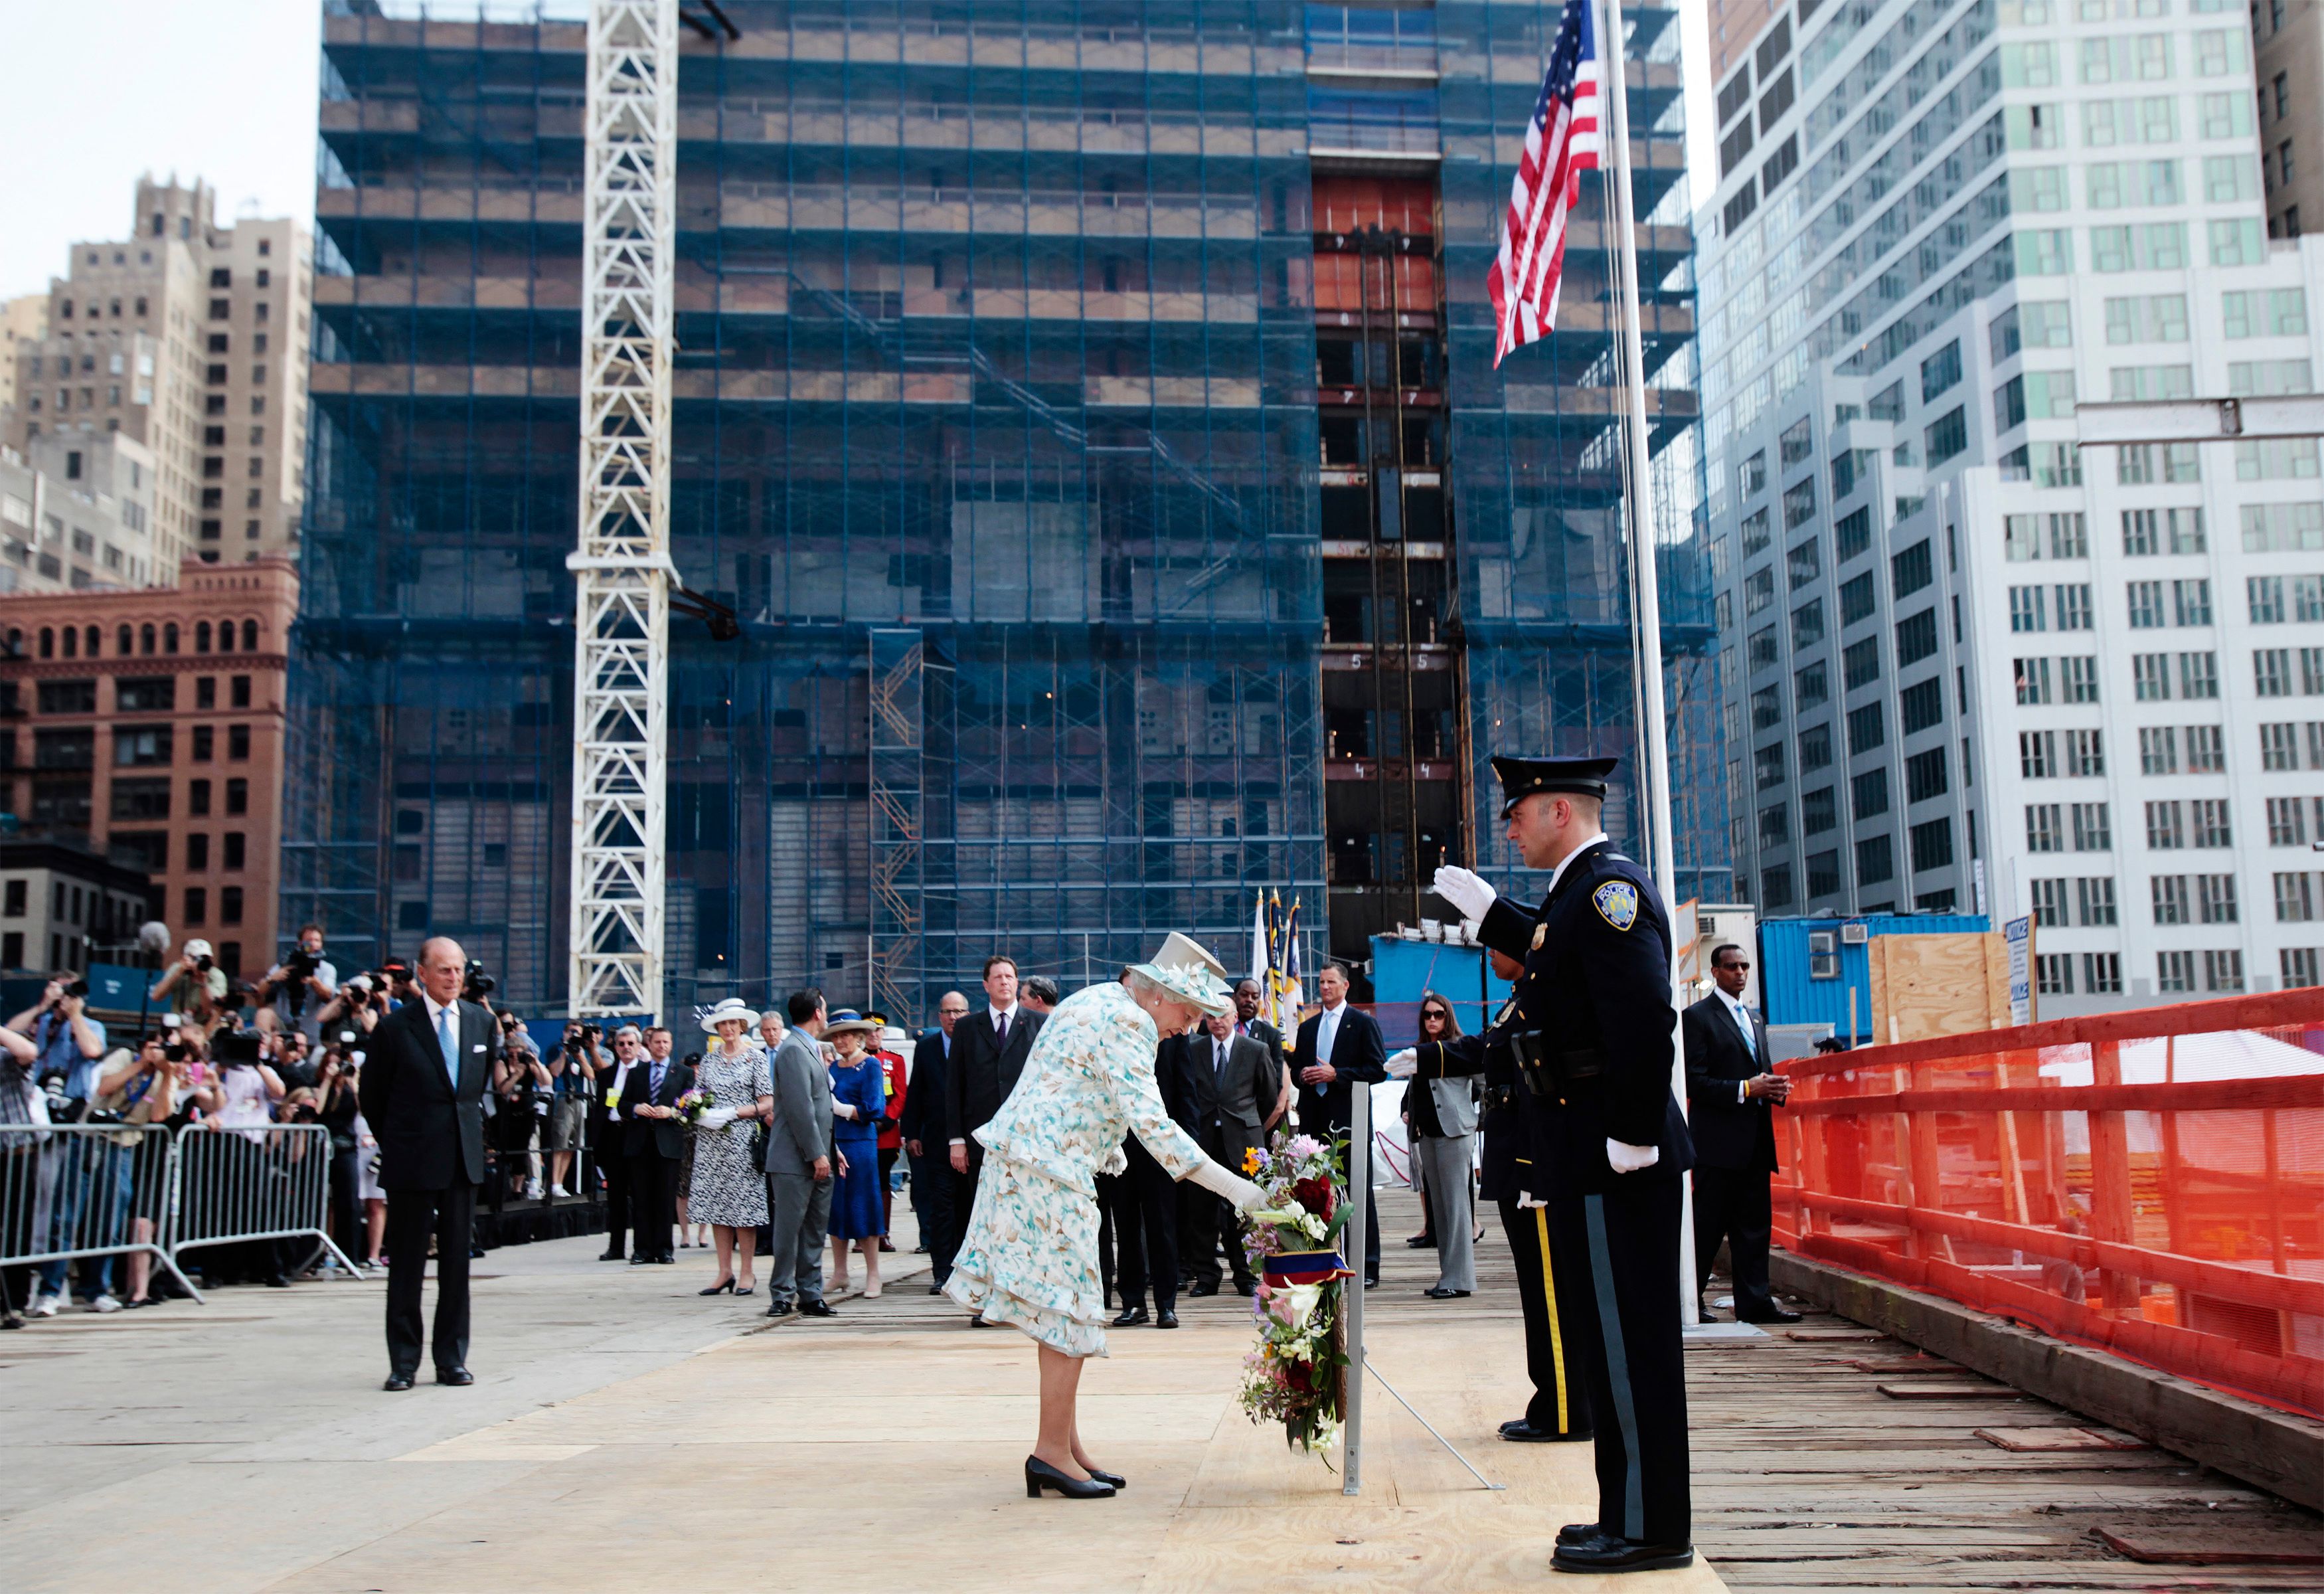 Queen Elizabeth II stands back after dedicating a wreath of flowers at the site of the September 11, 2001 World Trade Center attack during her visit to New York July 6, 2010.